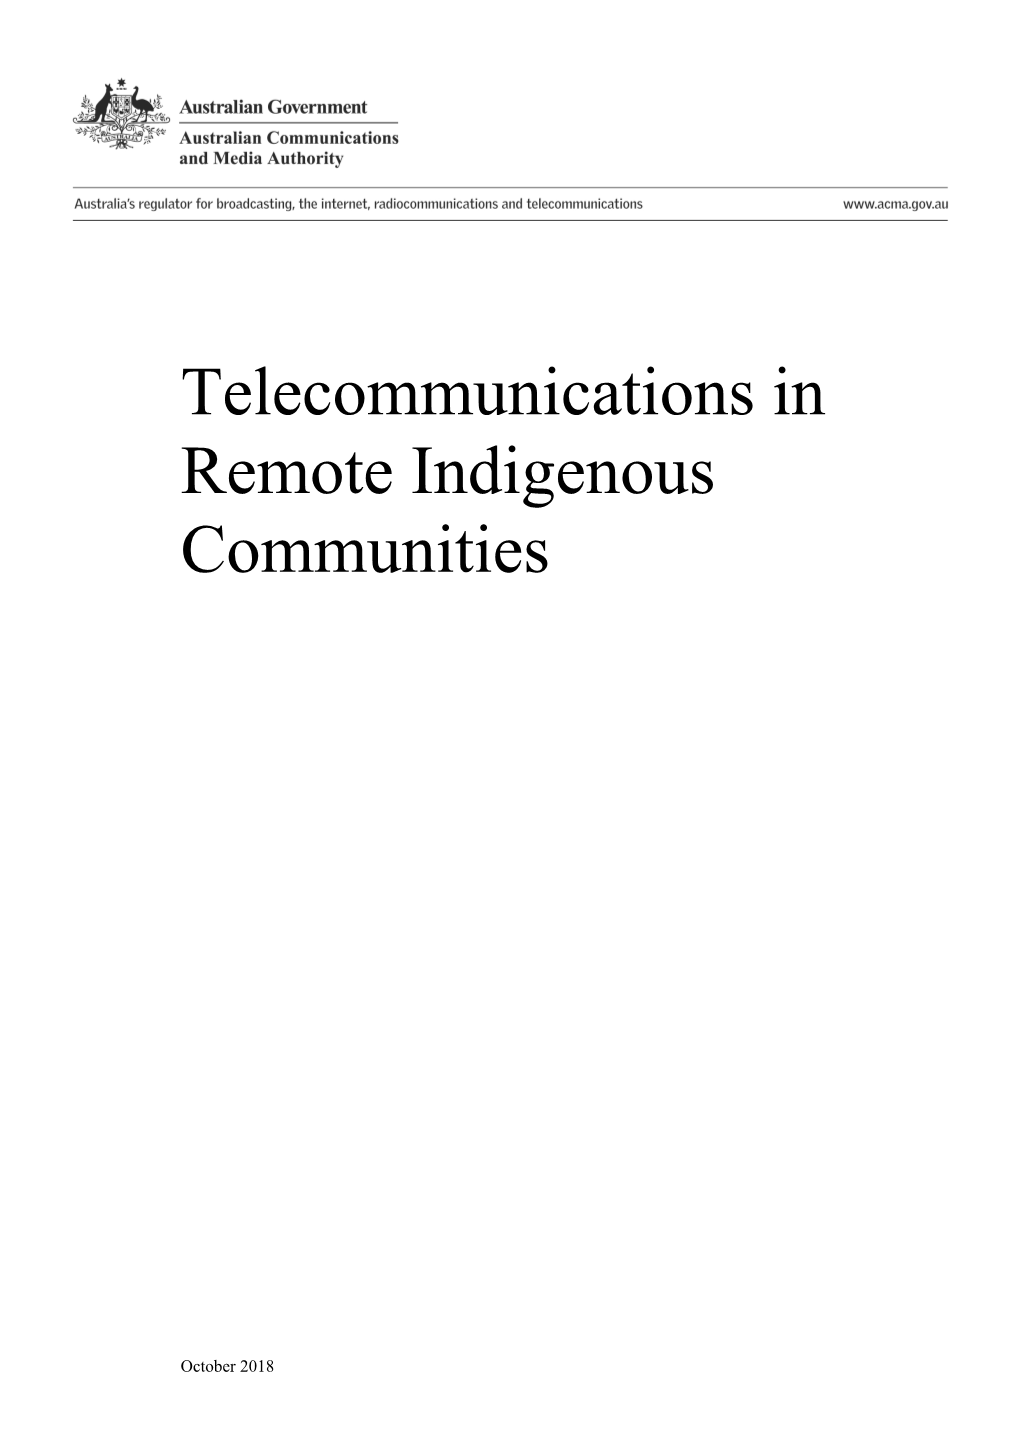 Telecommunications in Remote Indigenous Communities